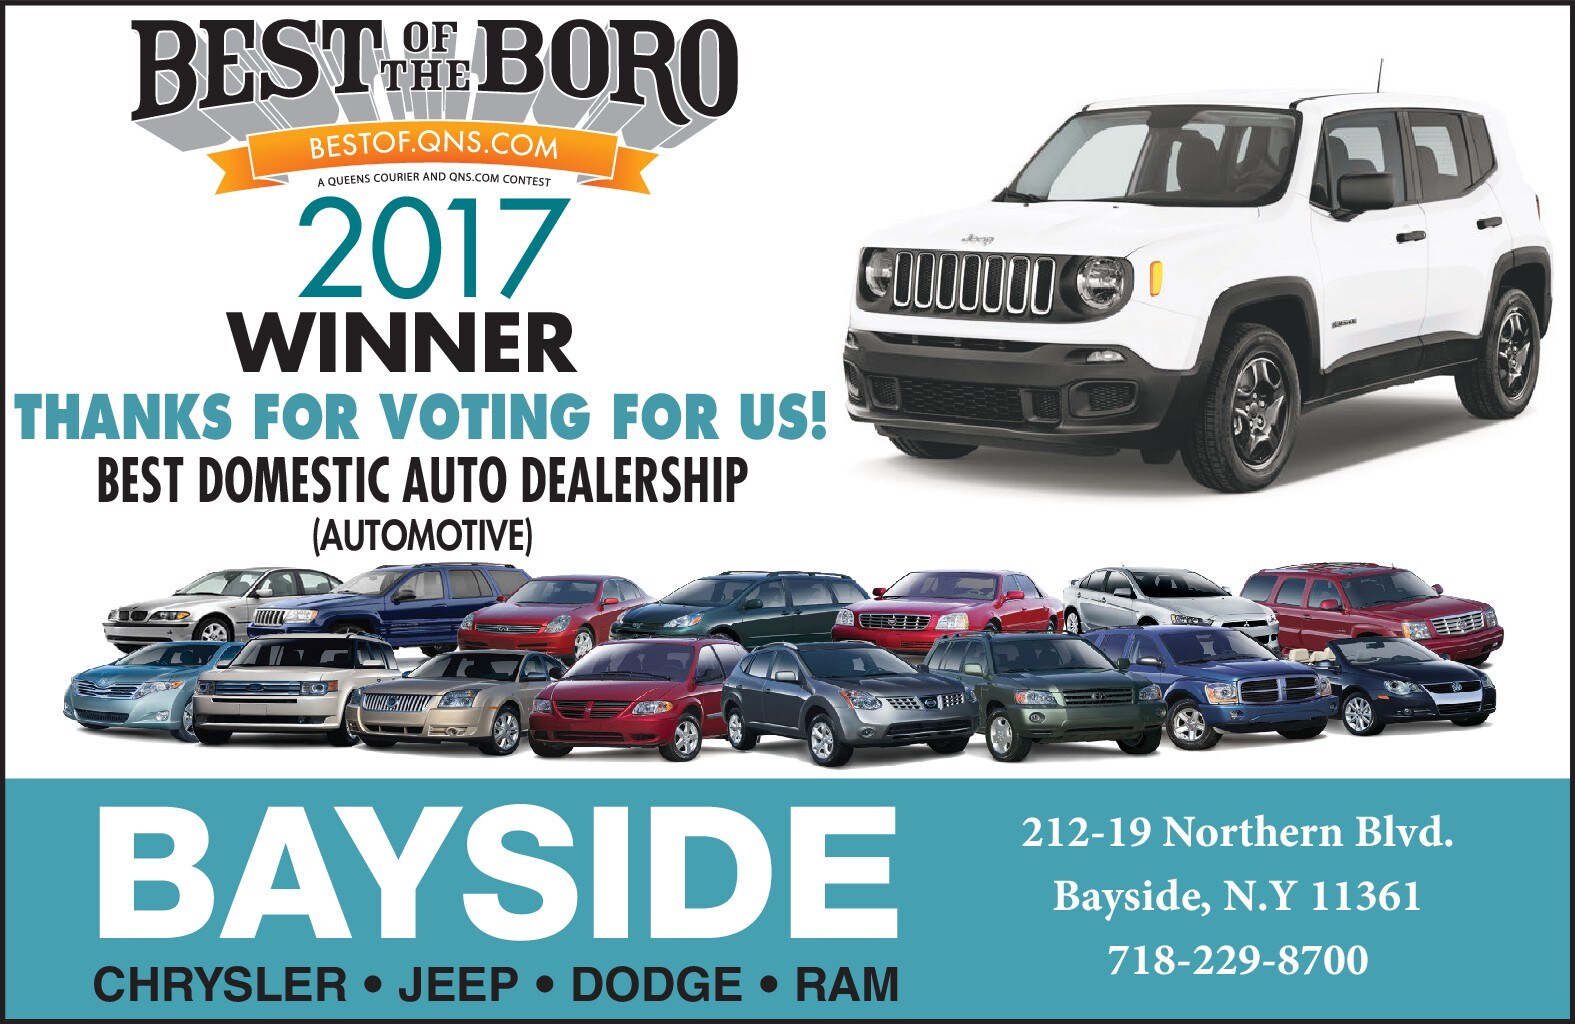 What do reviews say about Bayside Chrylser Jeep?